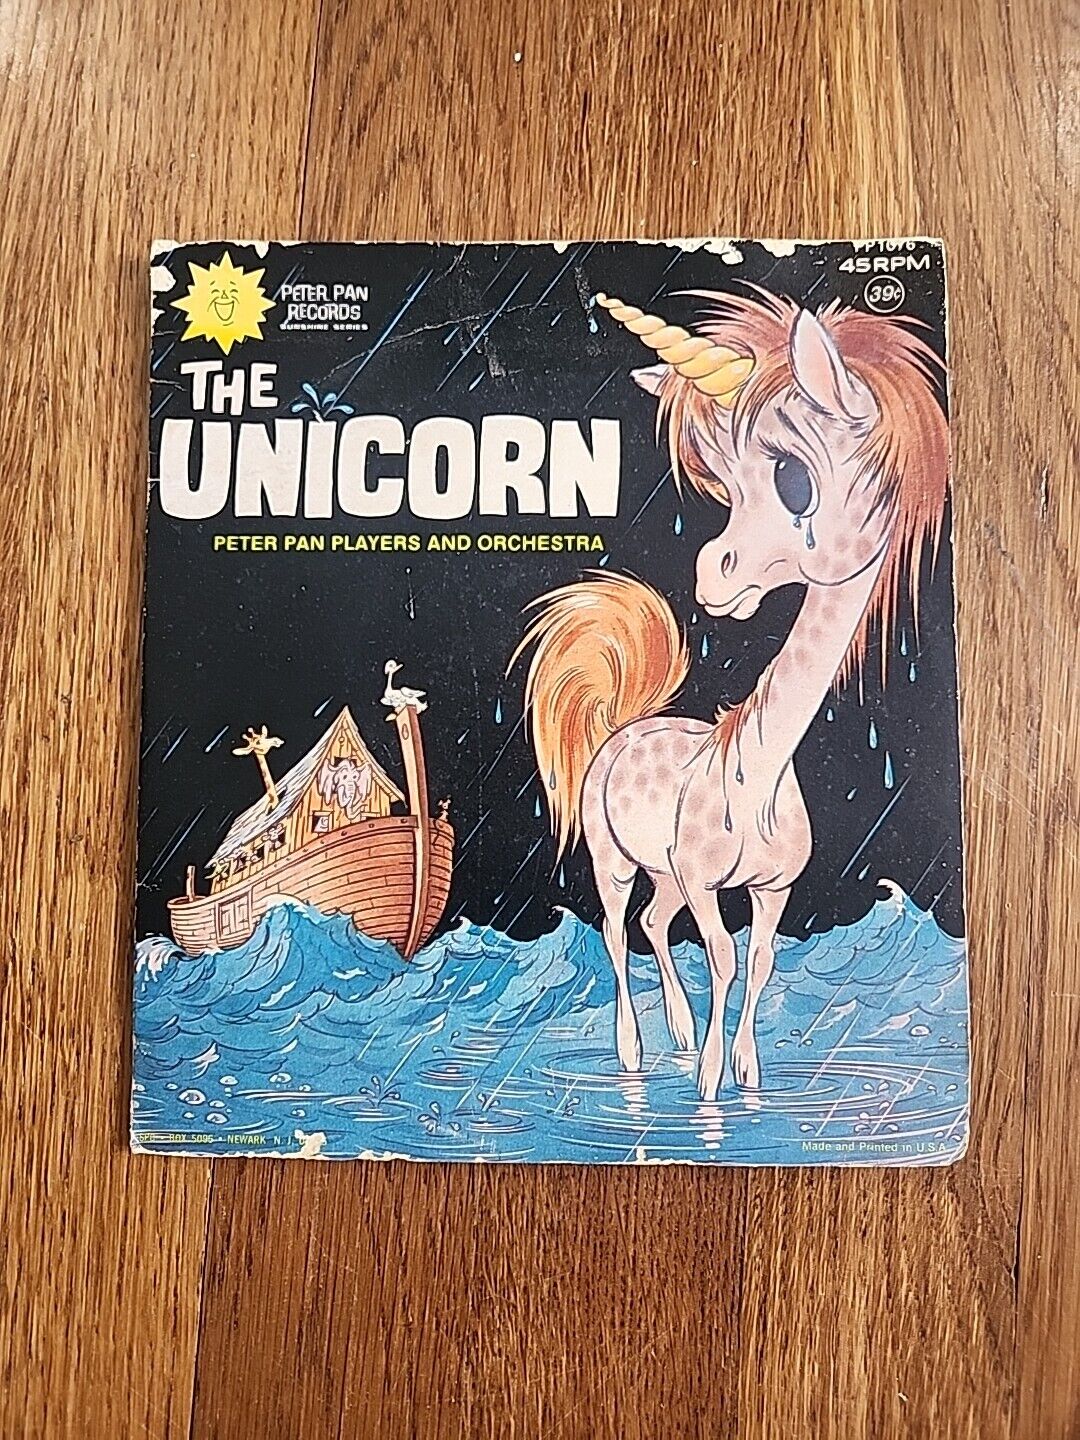 Vintage 70s Peter Pan Records The Unicorn & Dipsy Doodle Dragon 45rpm Record